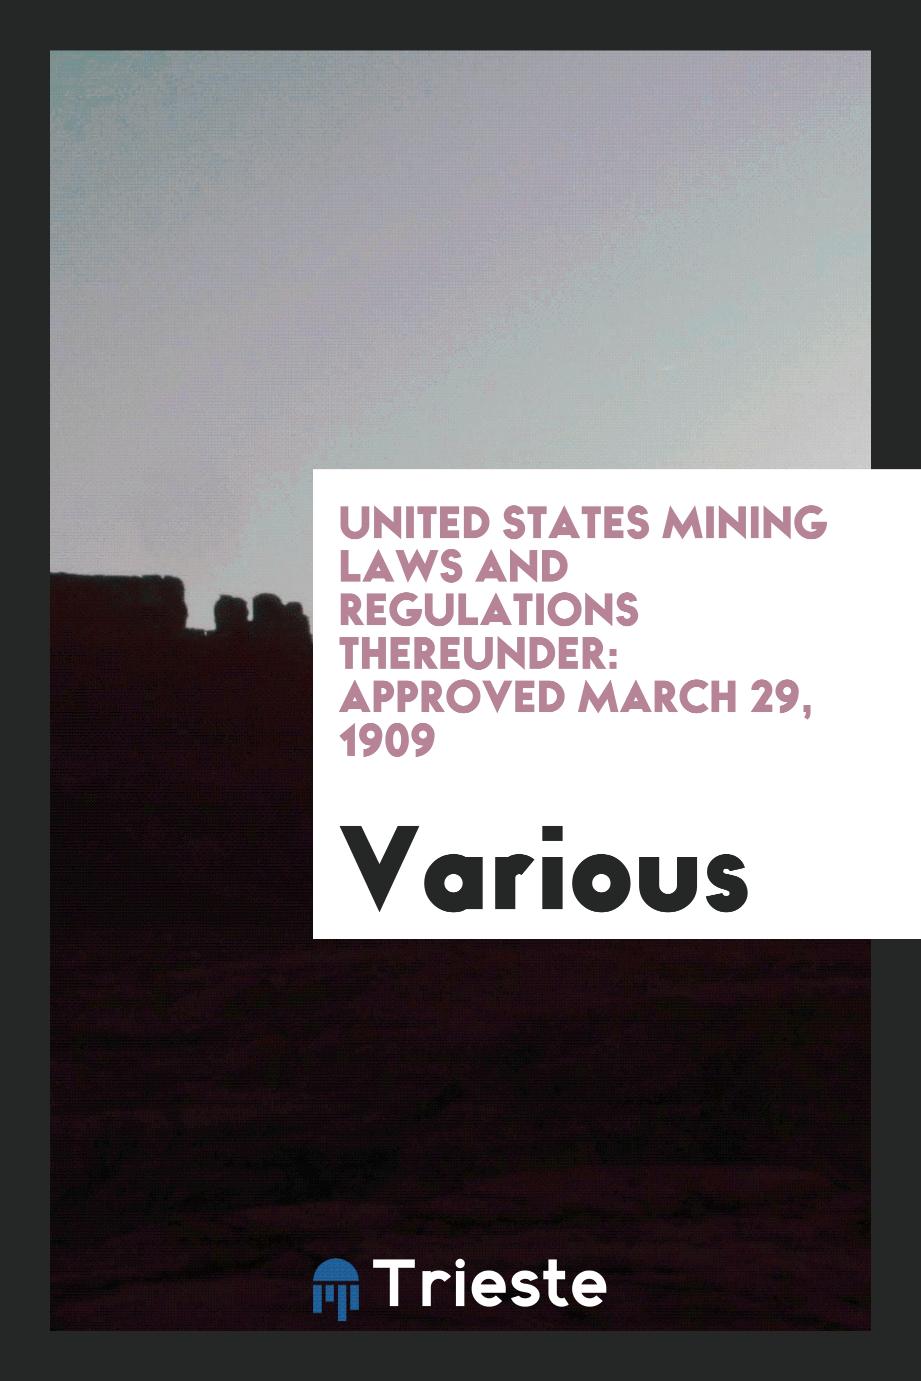 United States Mining Laws and Regulations Thereunder: Approved March 29, 1909